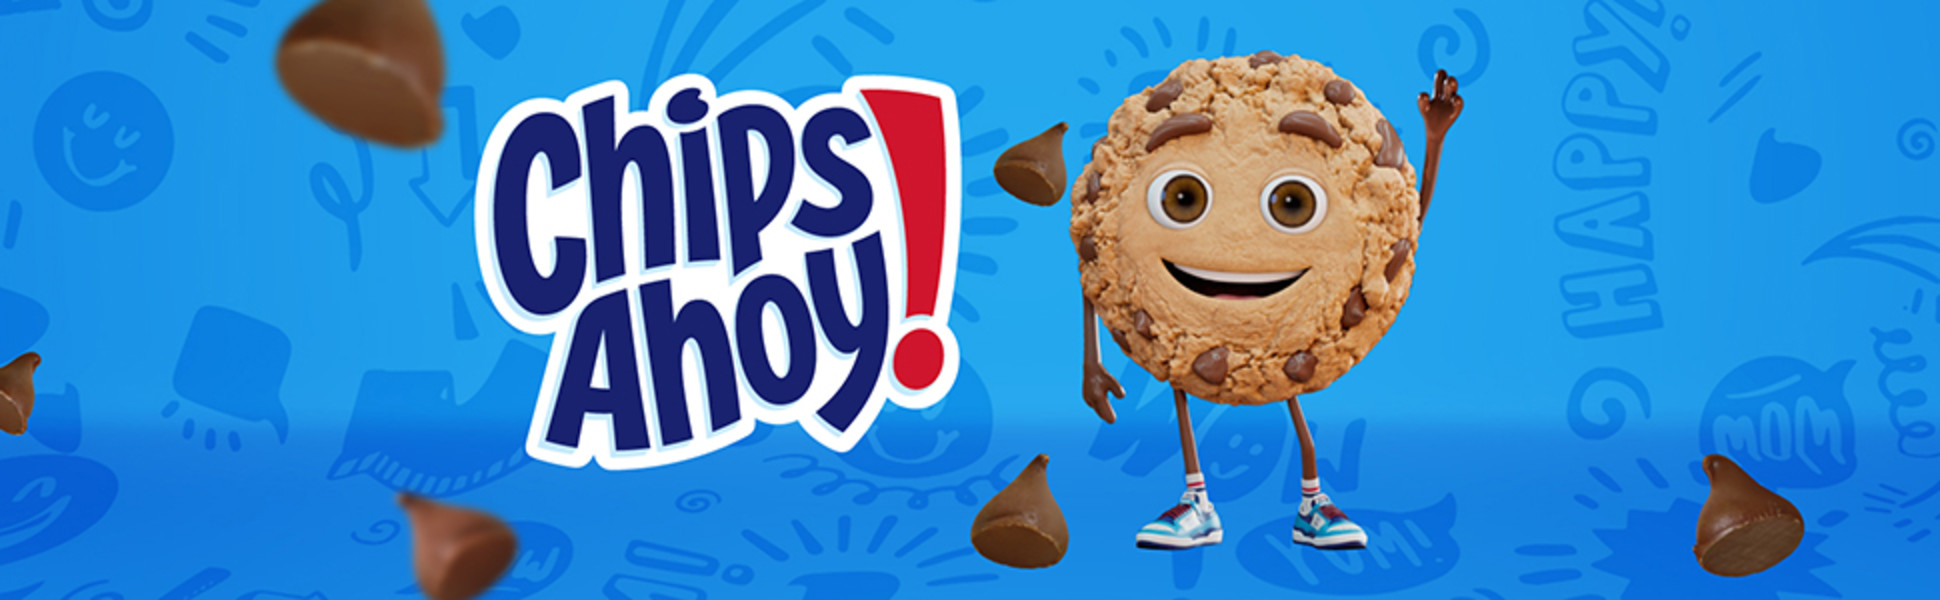 CHIPS AHOY! Chewy Confetti Cake Chocolate Chip Cookies with Sprinkles,  Family Size, 14.38 oz